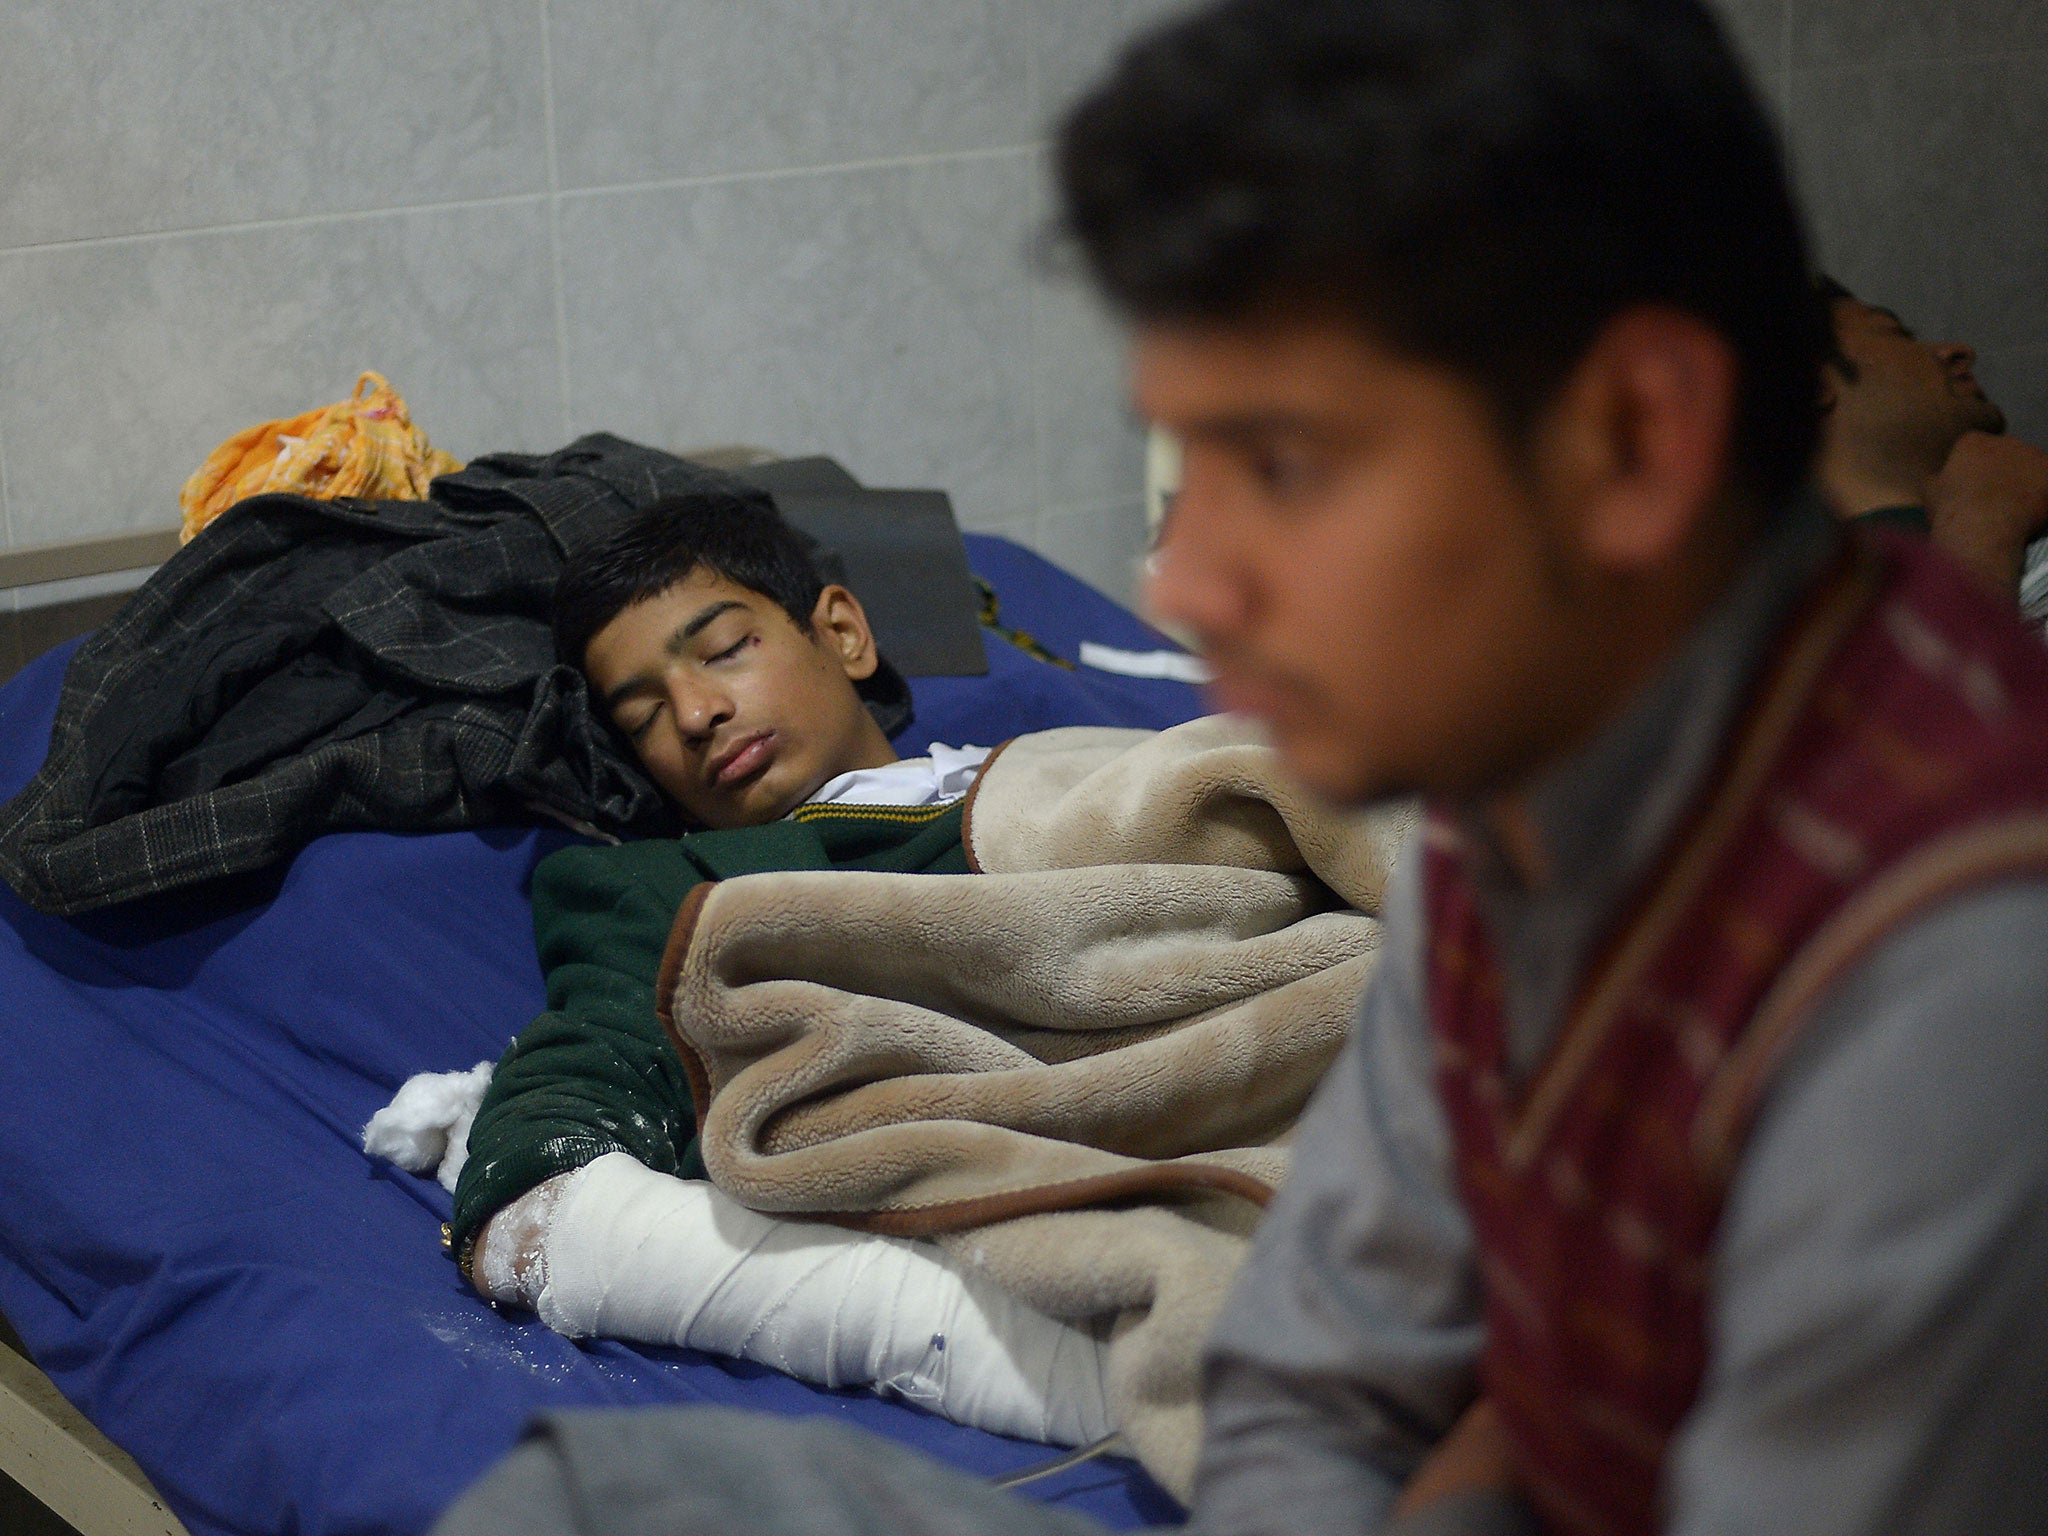 Wounded Pakistani student Mehran rests on a hospital bed after Taliban gunmen attacked a school in Peshawar on December 17, 2014